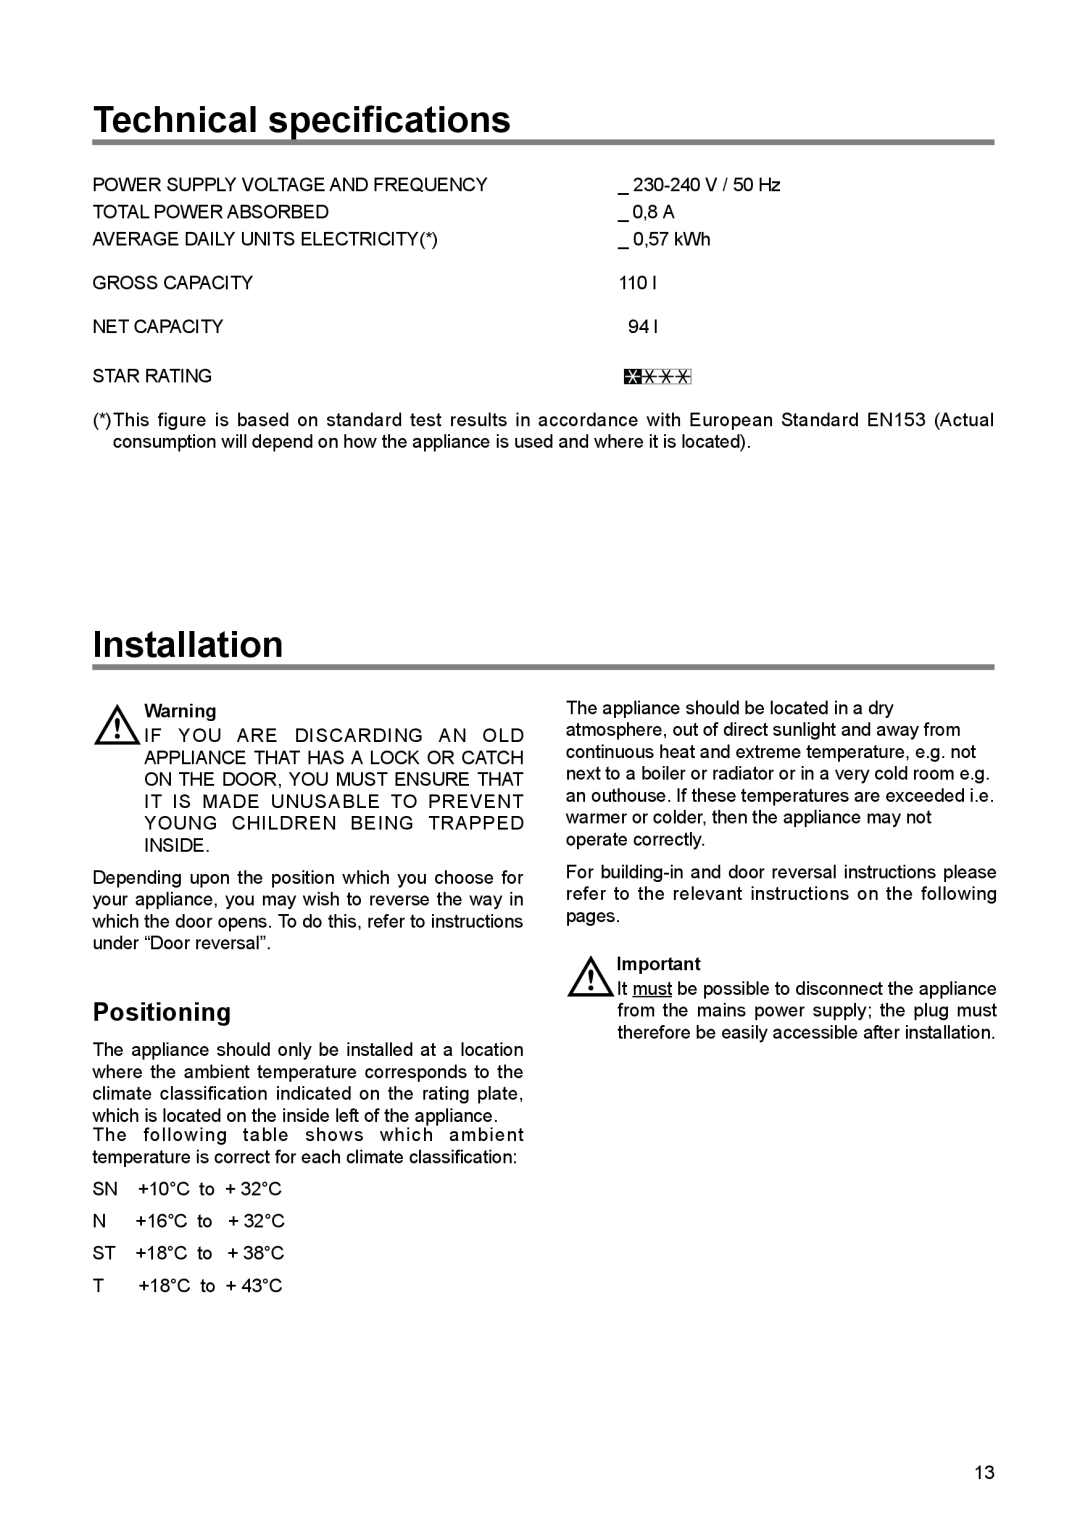 Zanussi ZBF 6114 manual Technical specifications, Installation, Positioning 